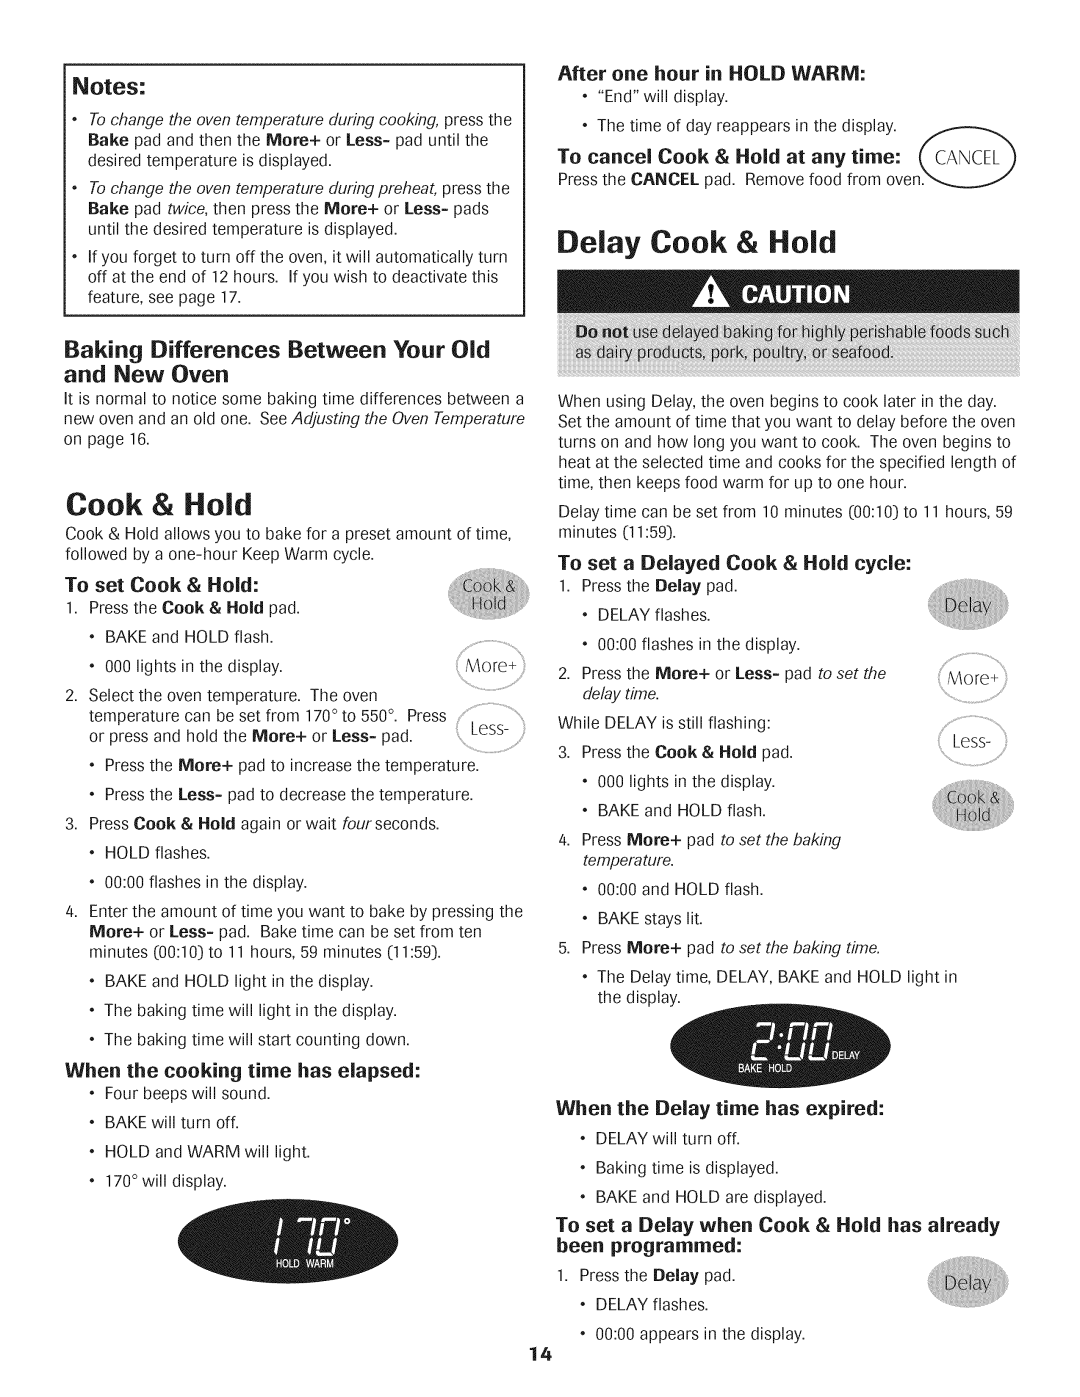 Maytag AGS1740BDQ, AGS1740BDW, 8113P592-60 Delay Cook & Hold, iLess-i, Baking Differences Between Your Old and New Oven 